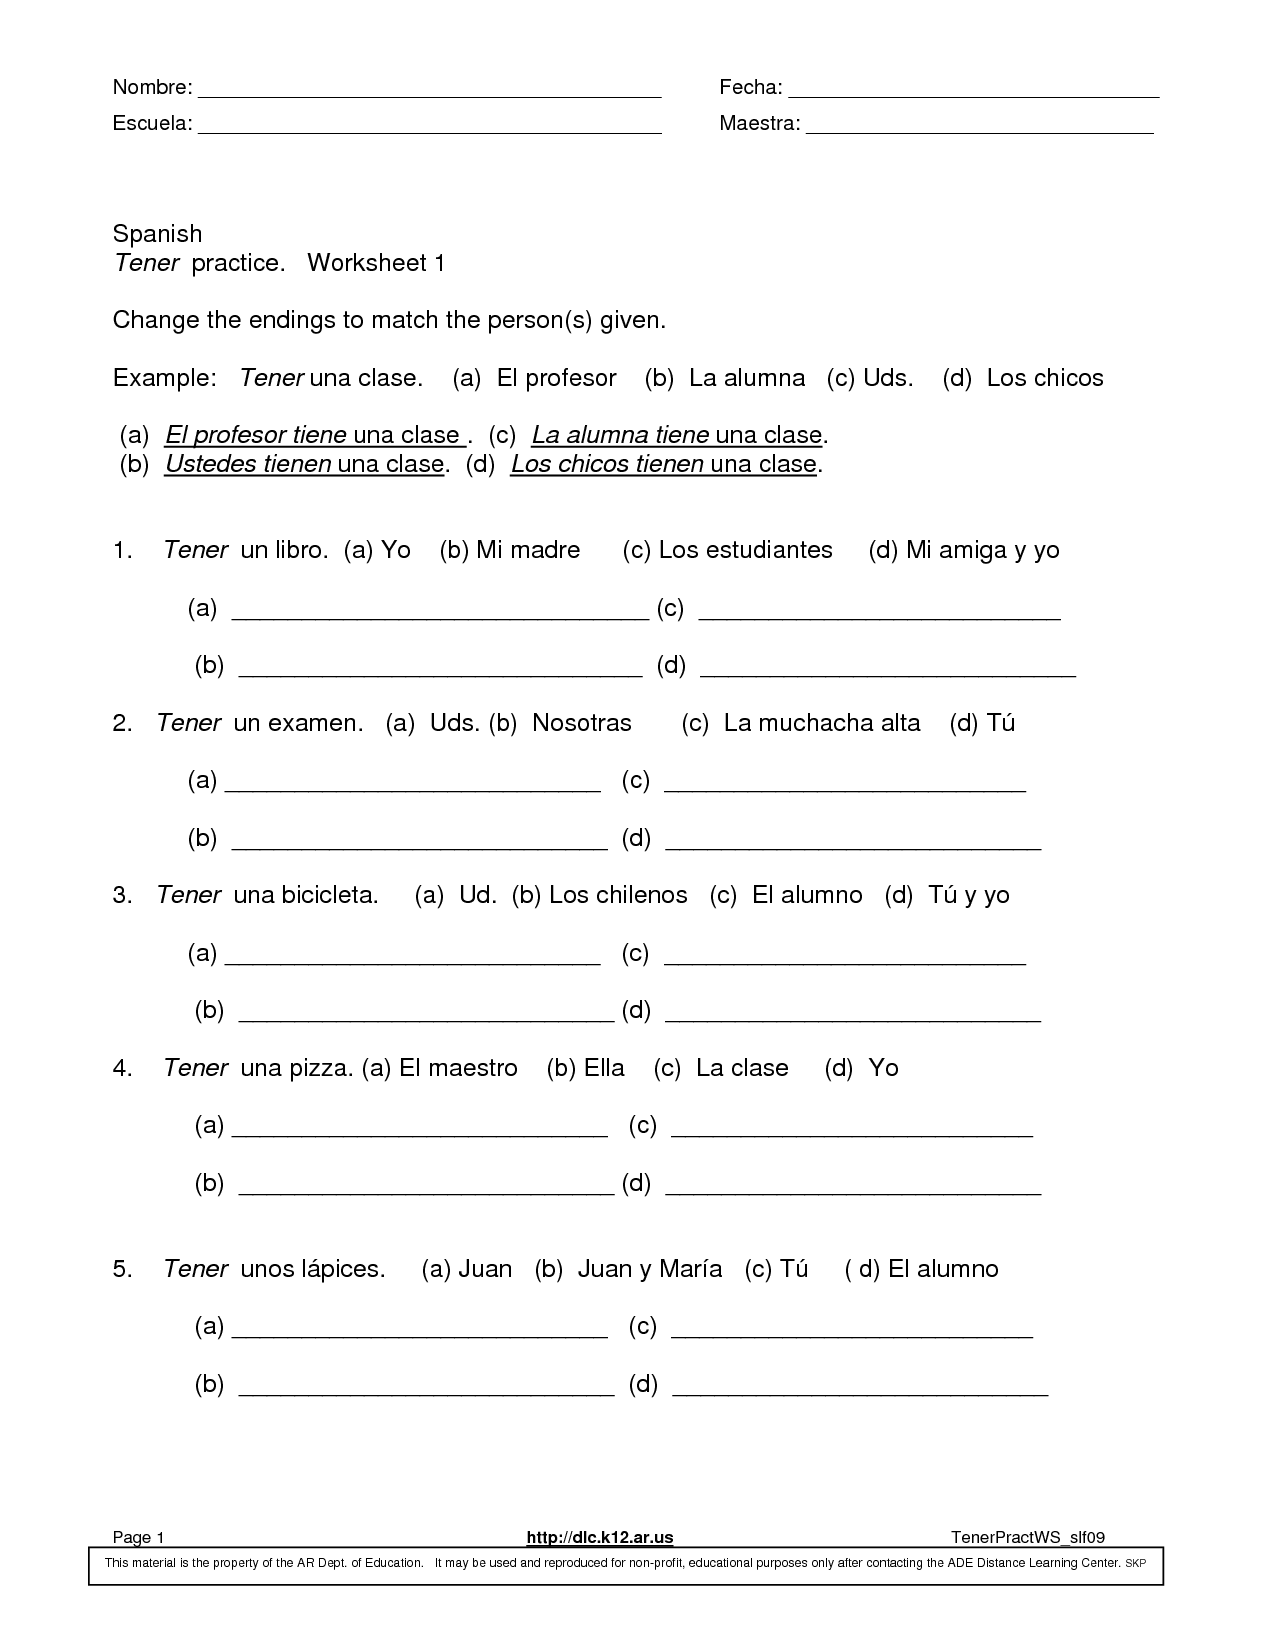 17-best-images-of-spanish-1-practice-worksheets-spanish-practice